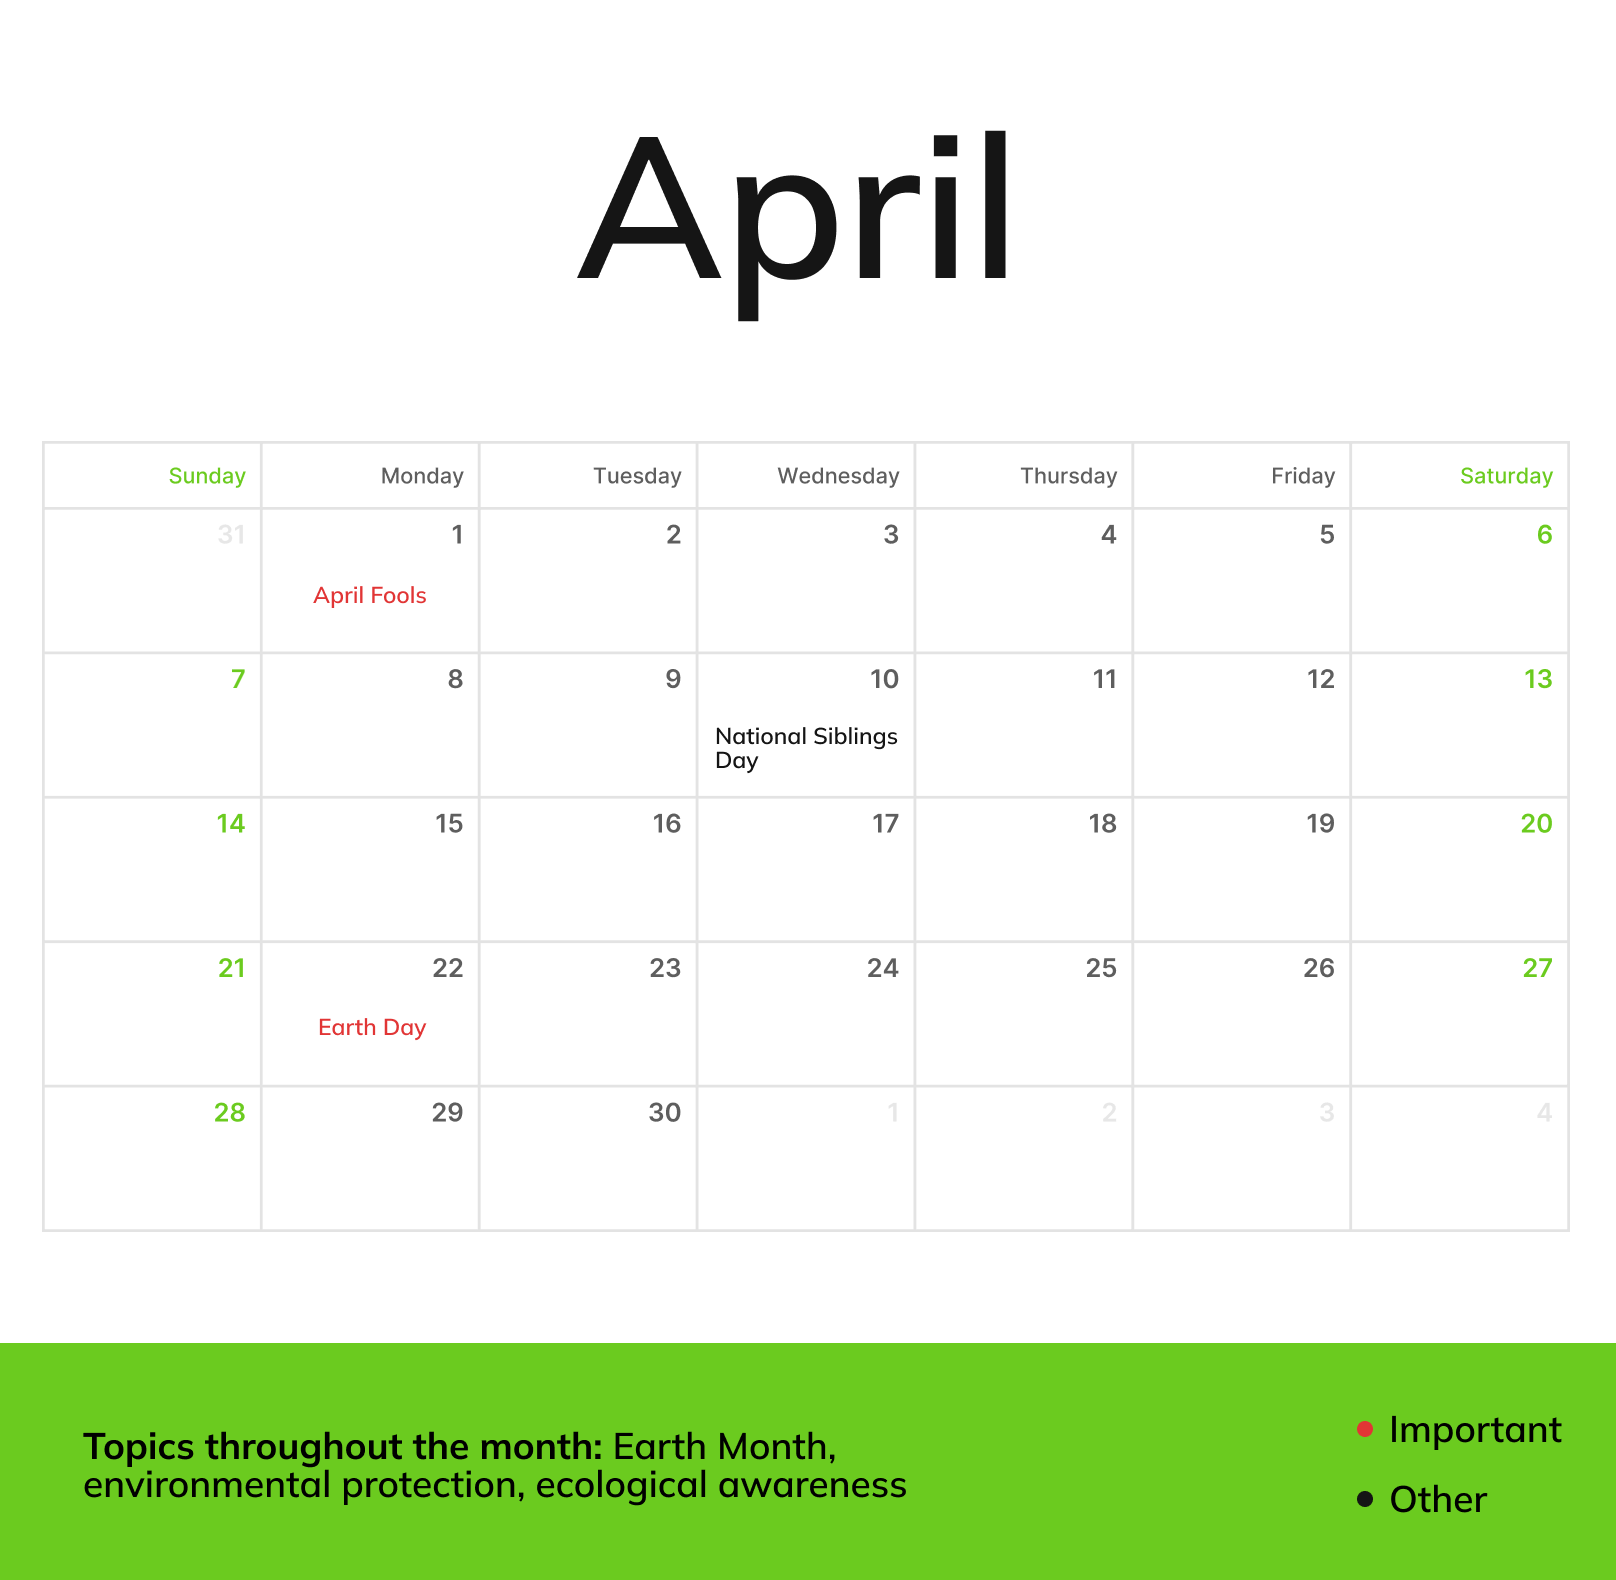 An April monthly calendar with holidays and topics throughout the month being Earth Month, environmental protection, ecological awareness